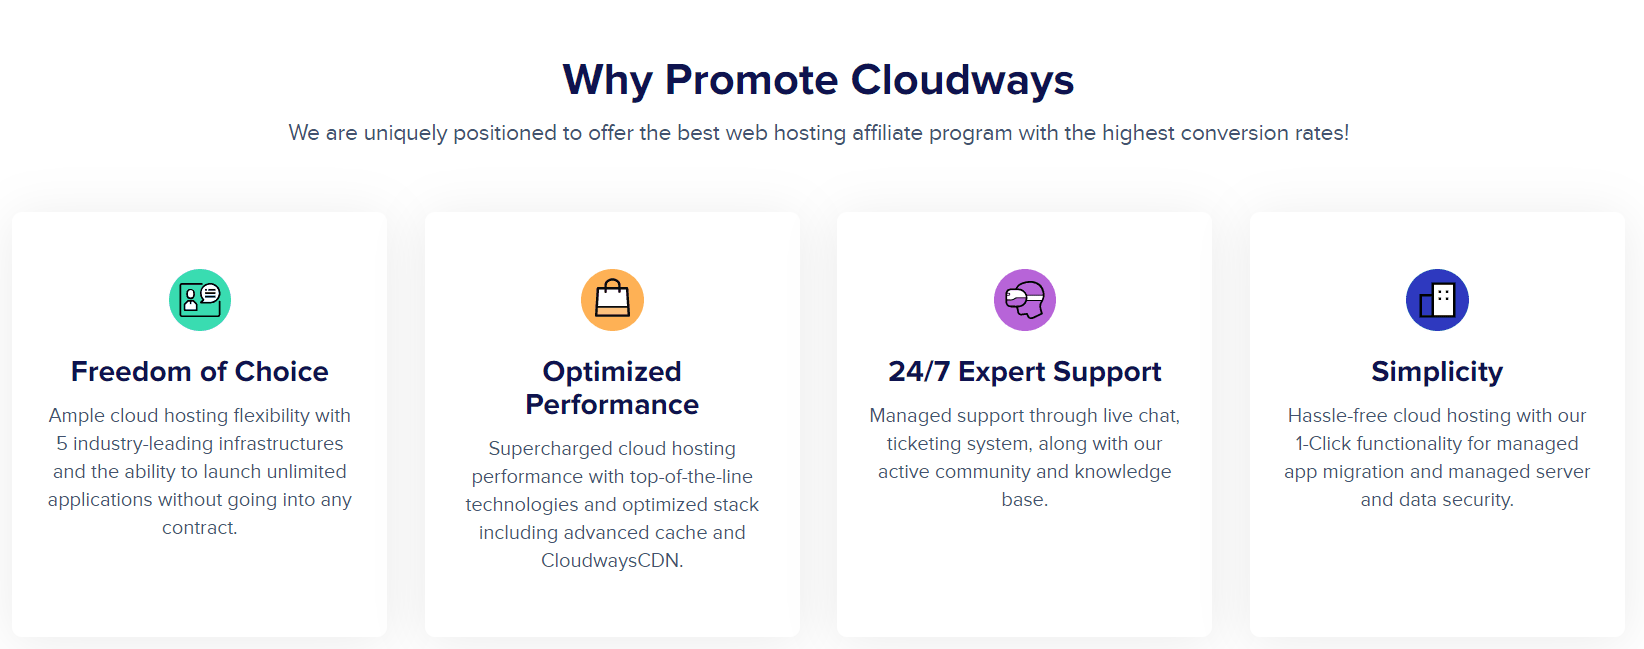 Cloudways Affiliate Review- Why promote Cloudways